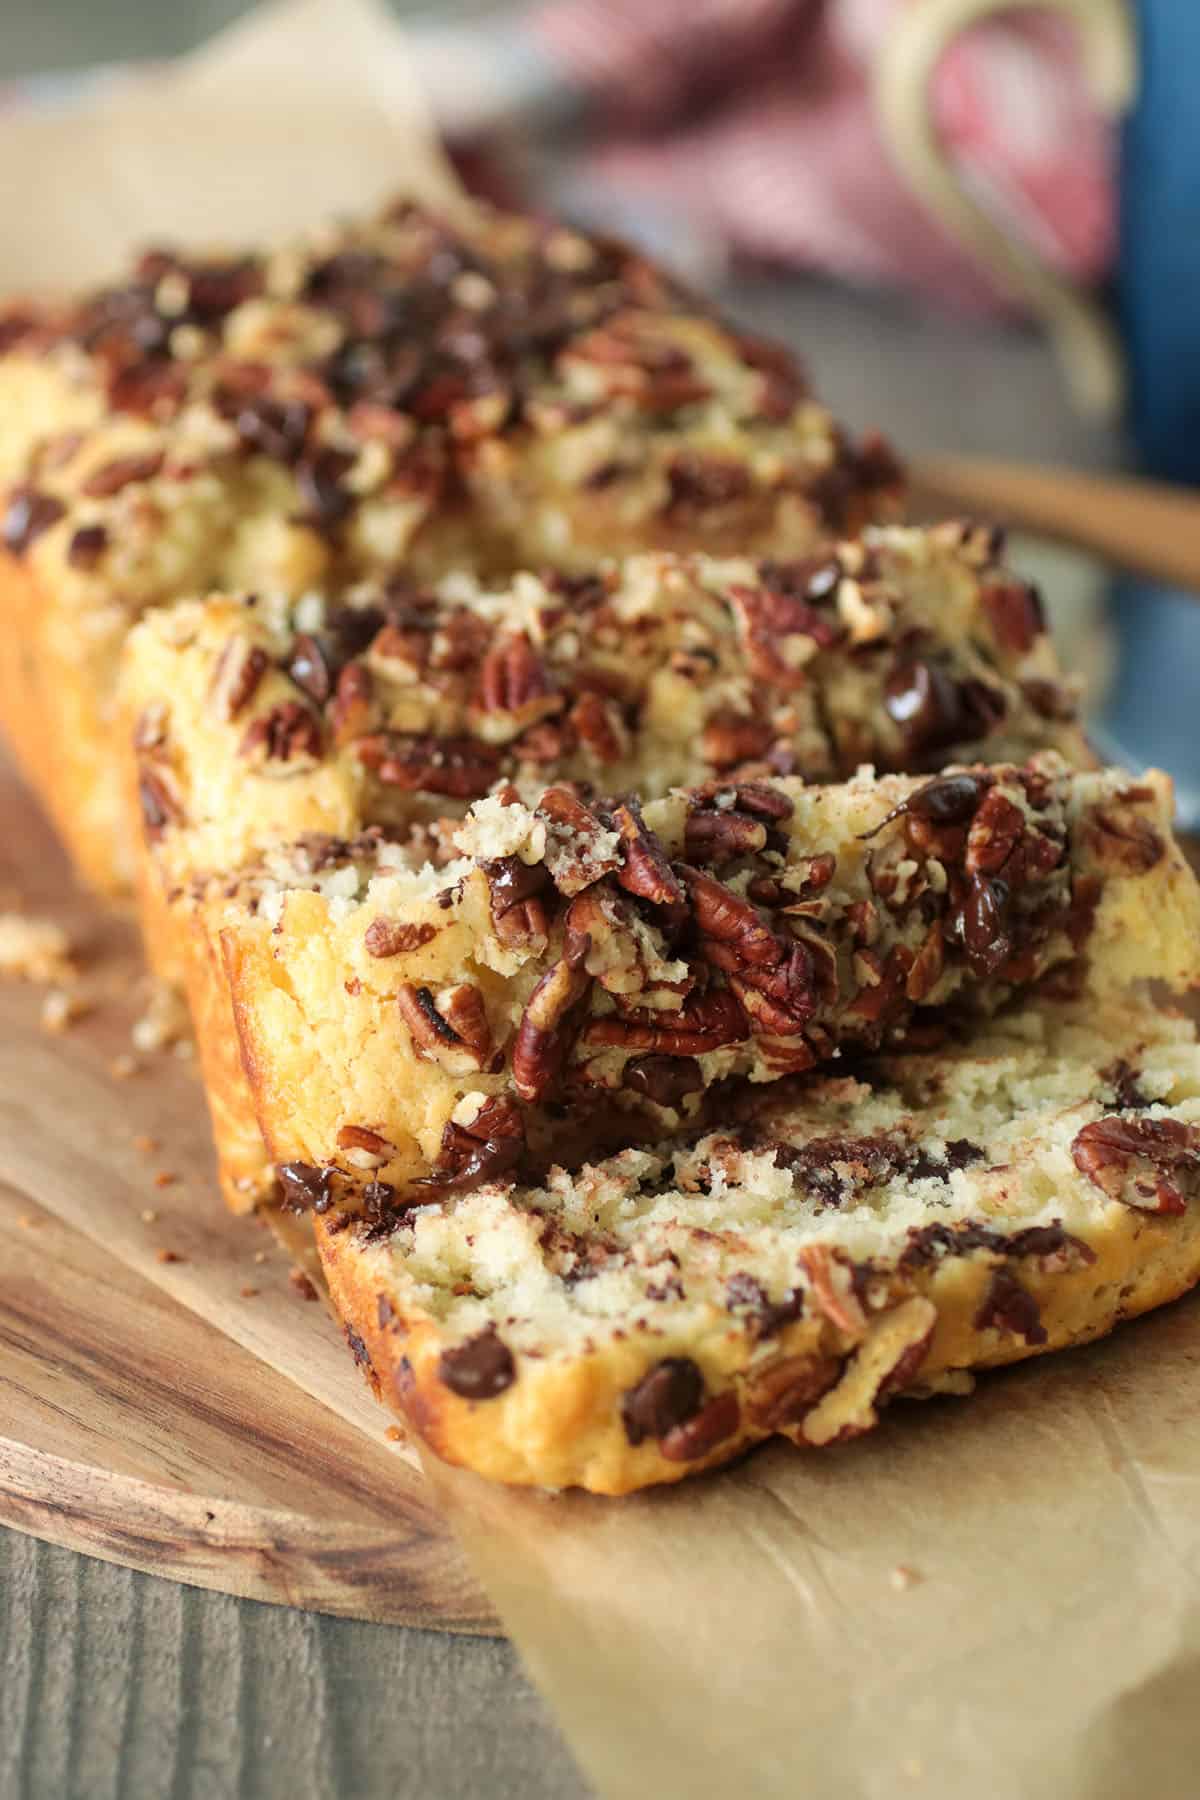 Sliced chocolate chip and pecan quick bread.